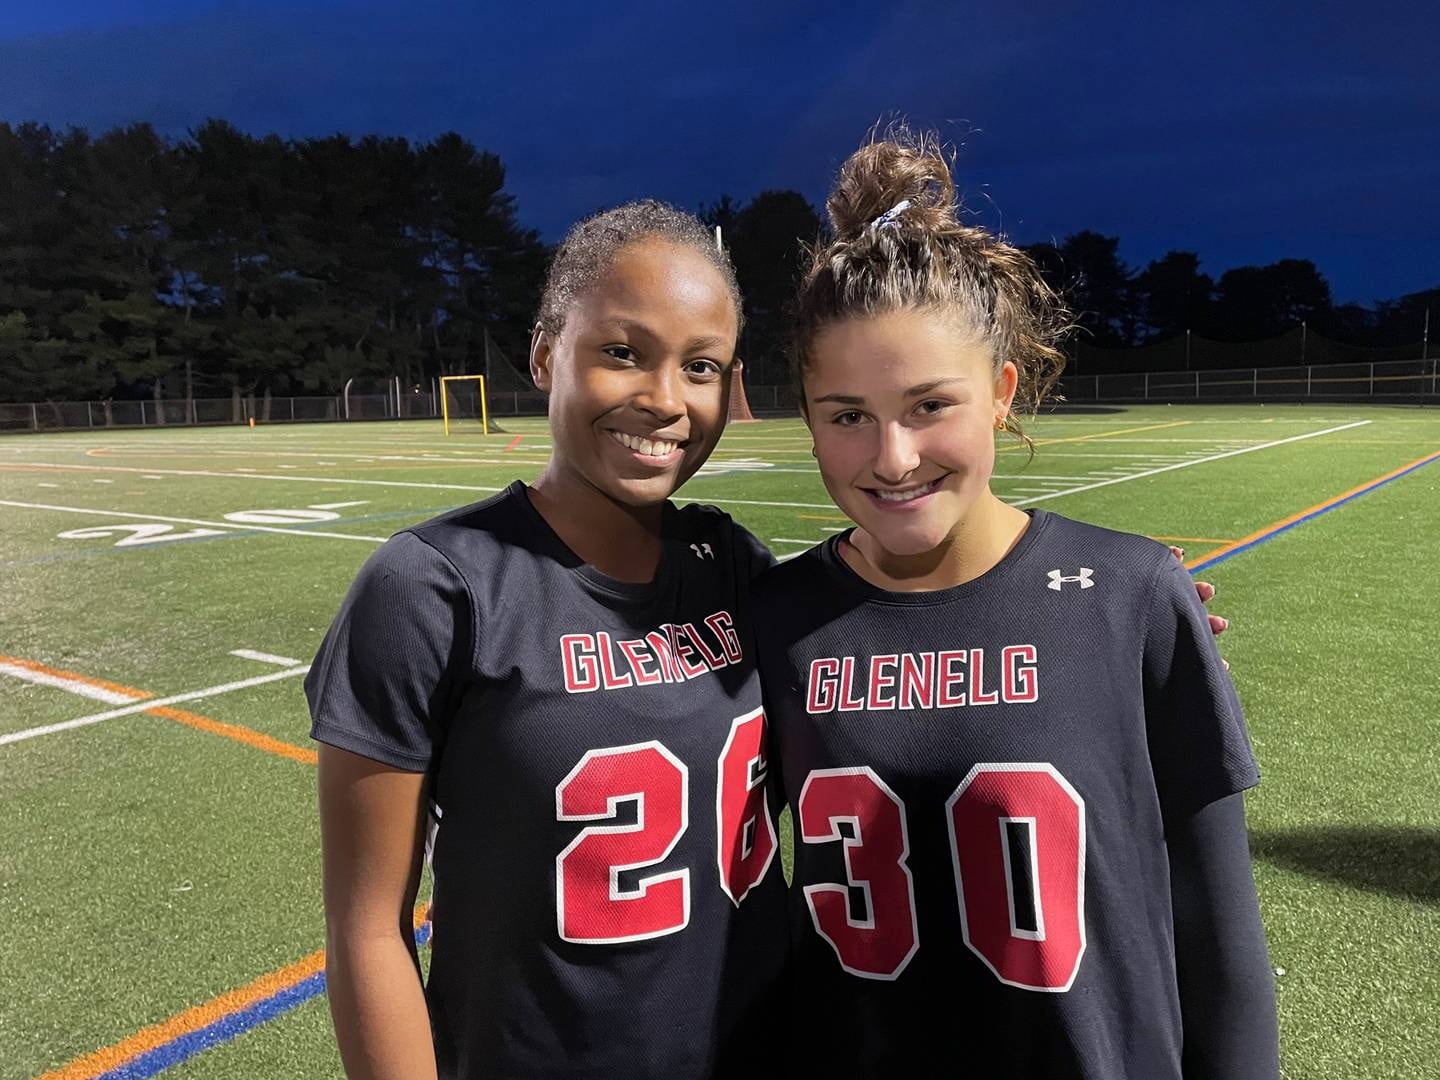 Glenelg midfielder Kamryn Henson (26) scored seven goals and goalie Emily Altshuler (30) made seven saves as the No. 7 Gladiators rolled past No. 15 Mount Hebron, 15-1, Wednesday night to win their third straight Howard County girls lacrosse championship. The Gladiators finished unbeaten in the county for the third straight season.